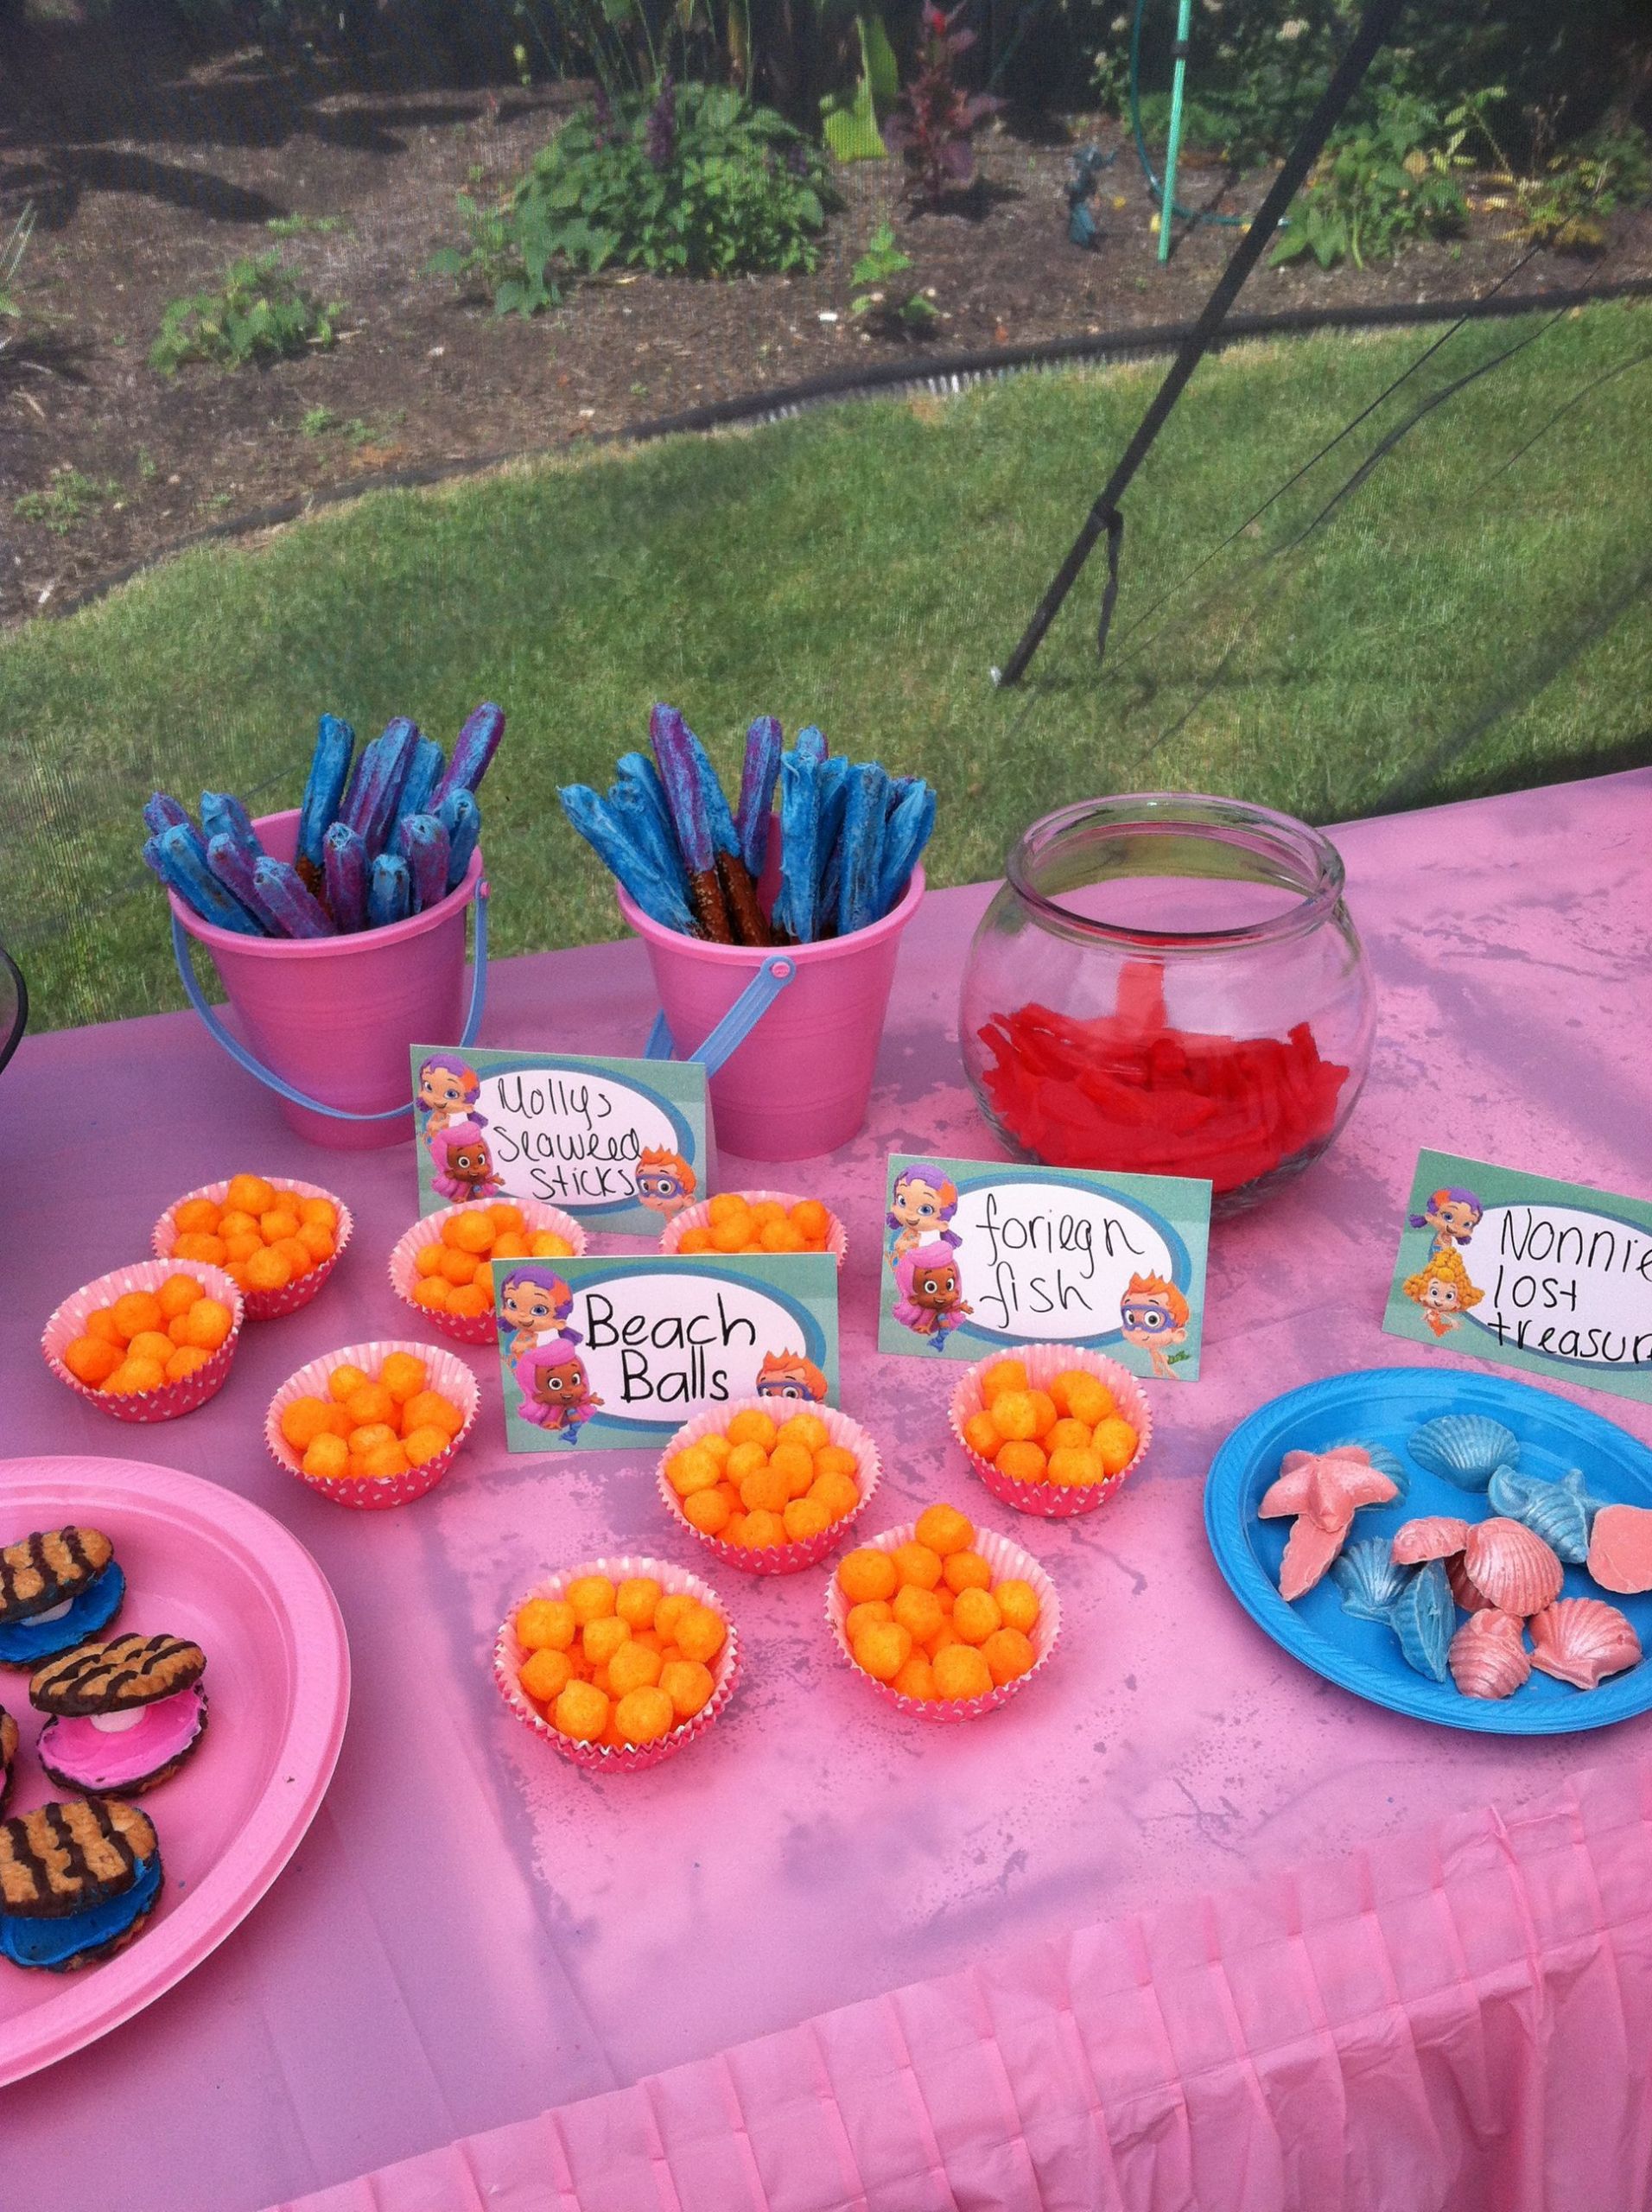 Bubble Guppies Party Food Ideas
 Gemma s bubble guppies party